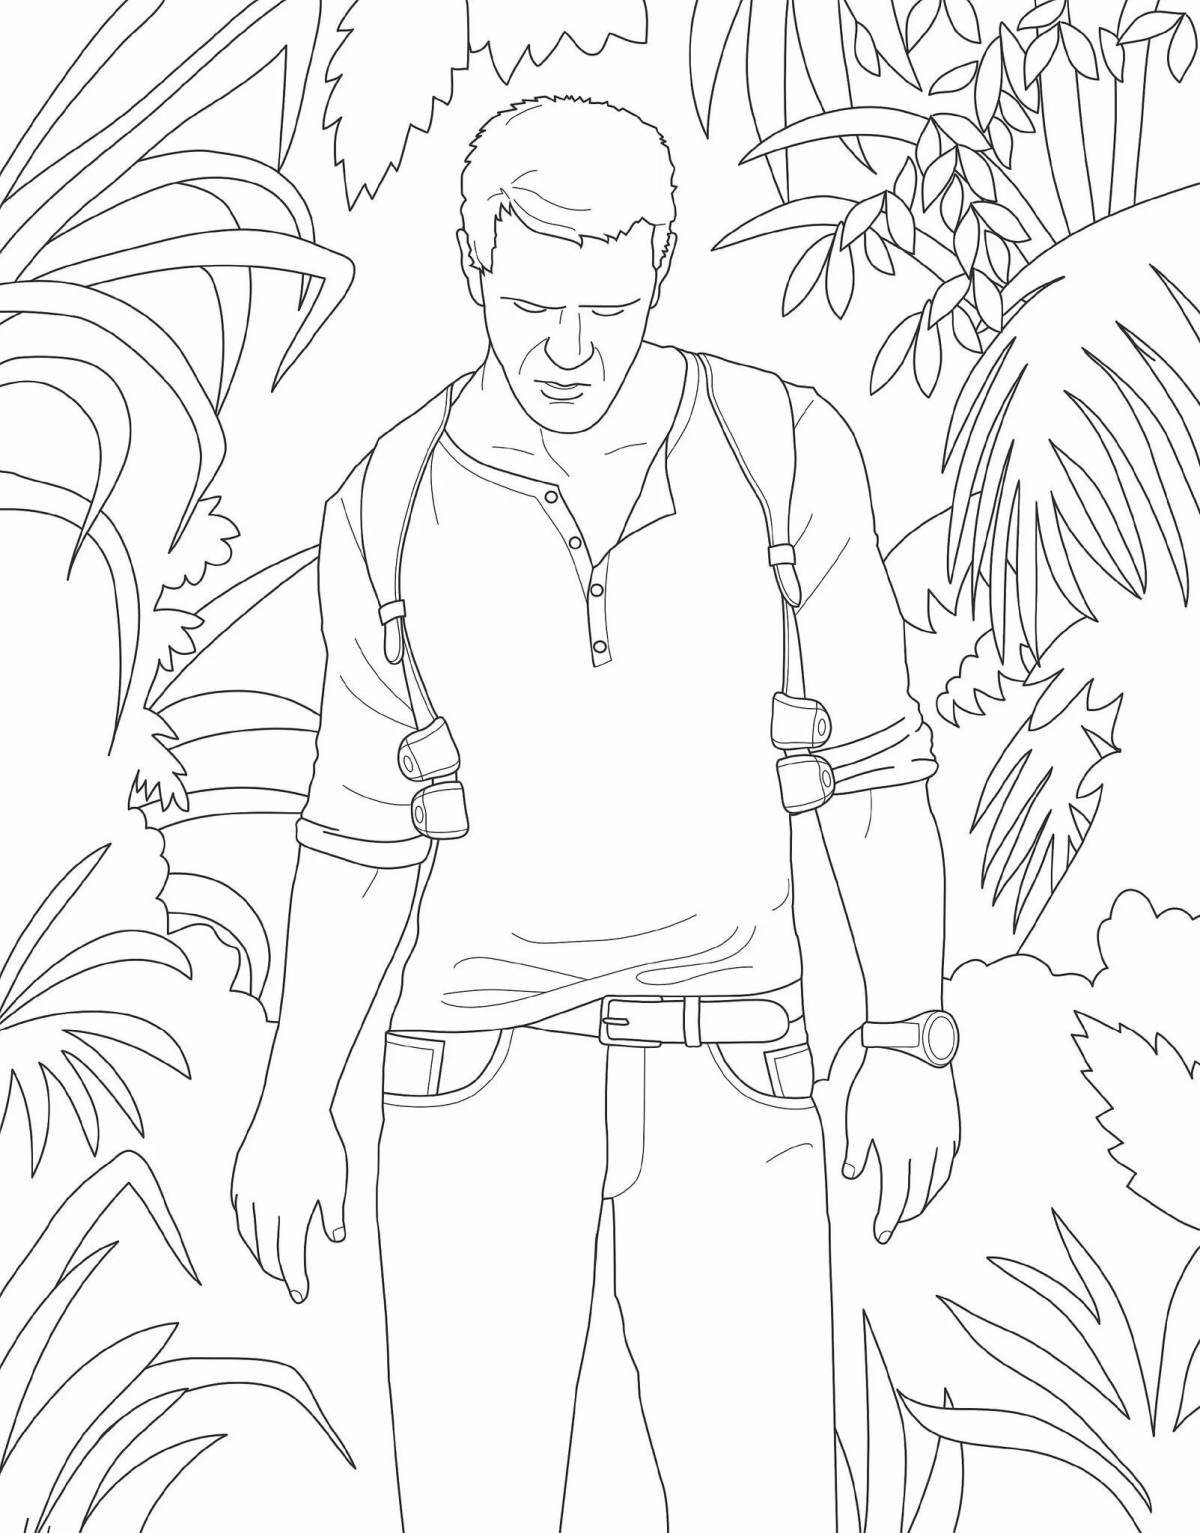 Fascinating coloring page of gta 5 games